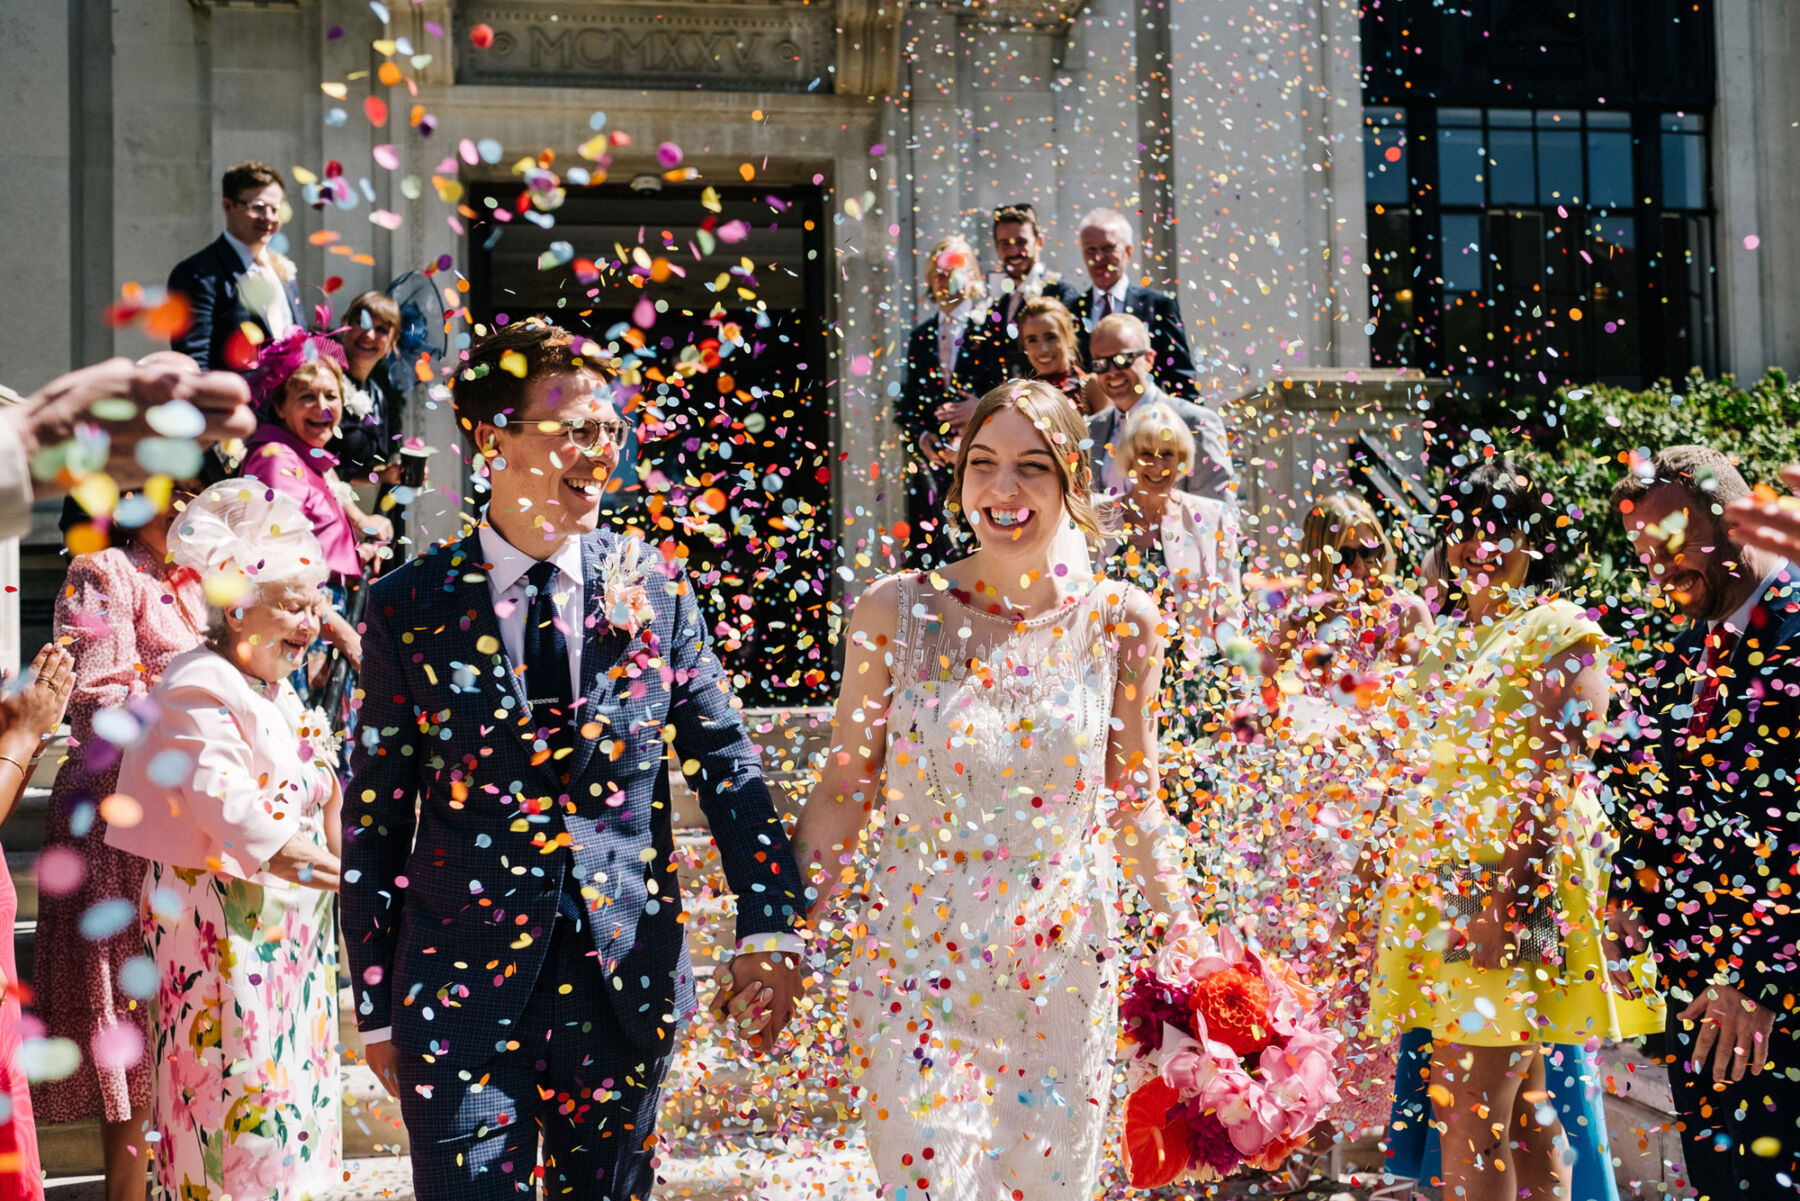 Colourful confetti showering down on a bride and groom on a sunny day